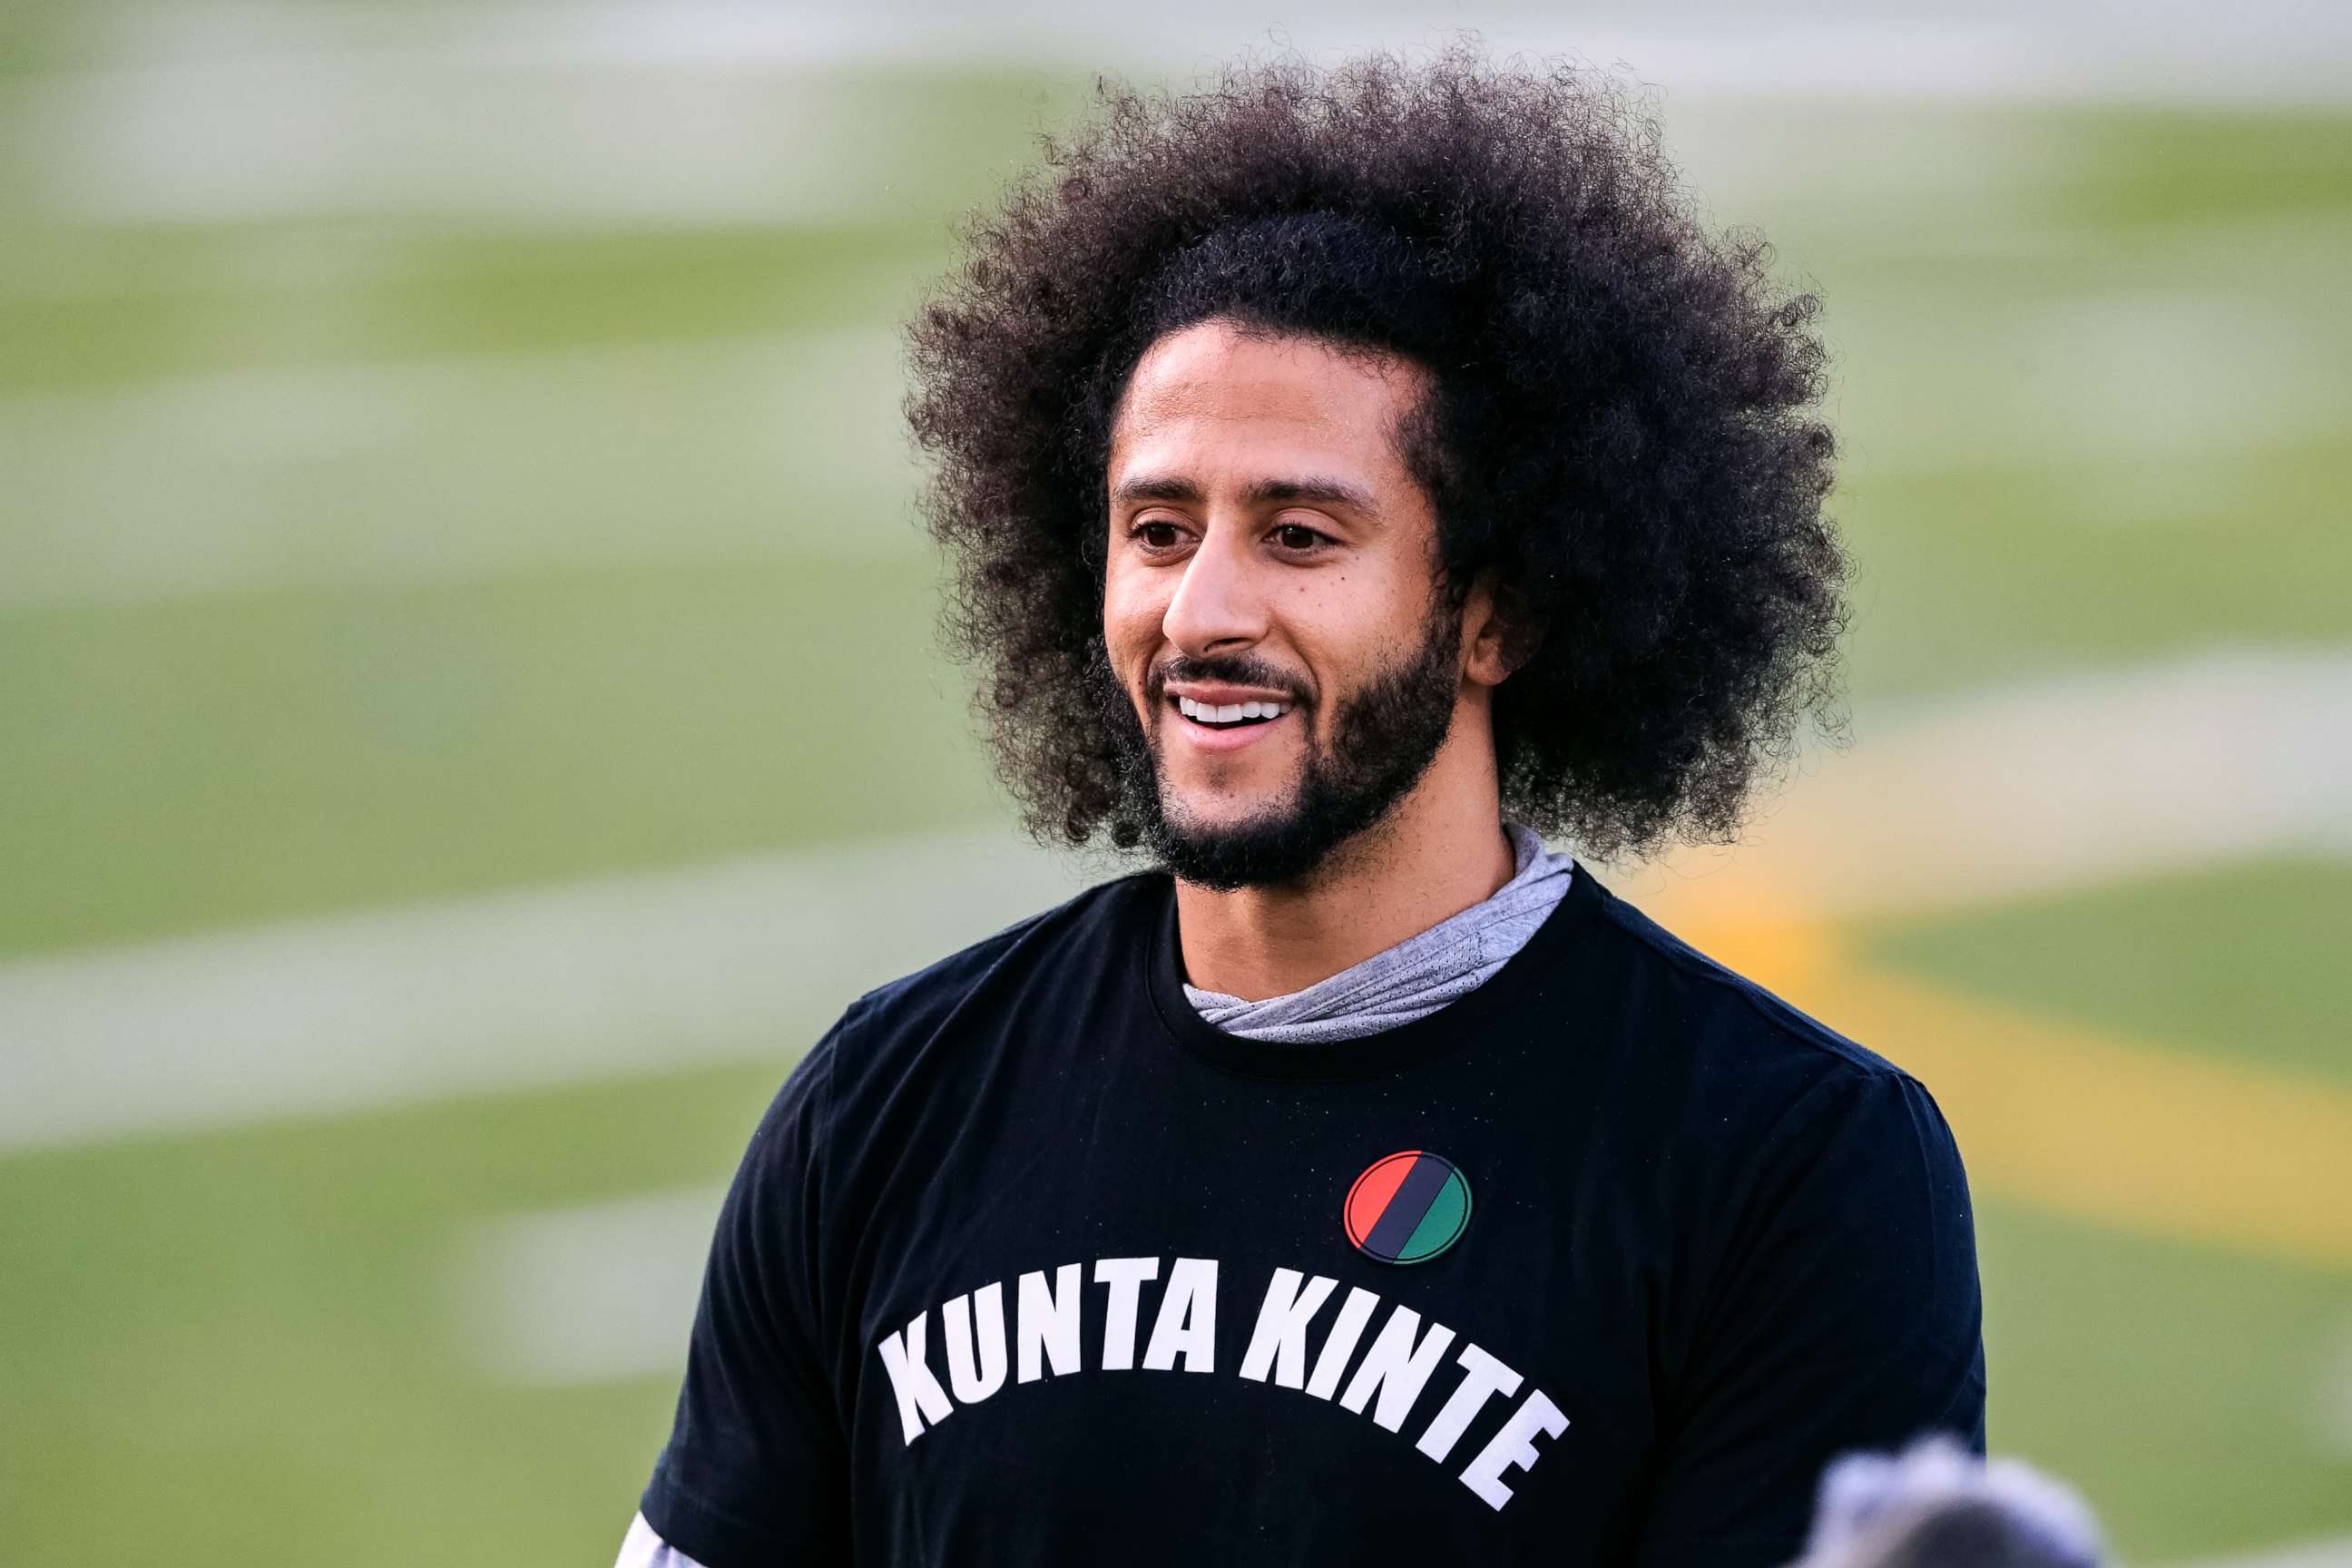 PHOTO: Colin Kaepernick looks on during his NFL workout held at Charles R Drew high school, Nov. 16, 2019, in Riverdale, Georgia.